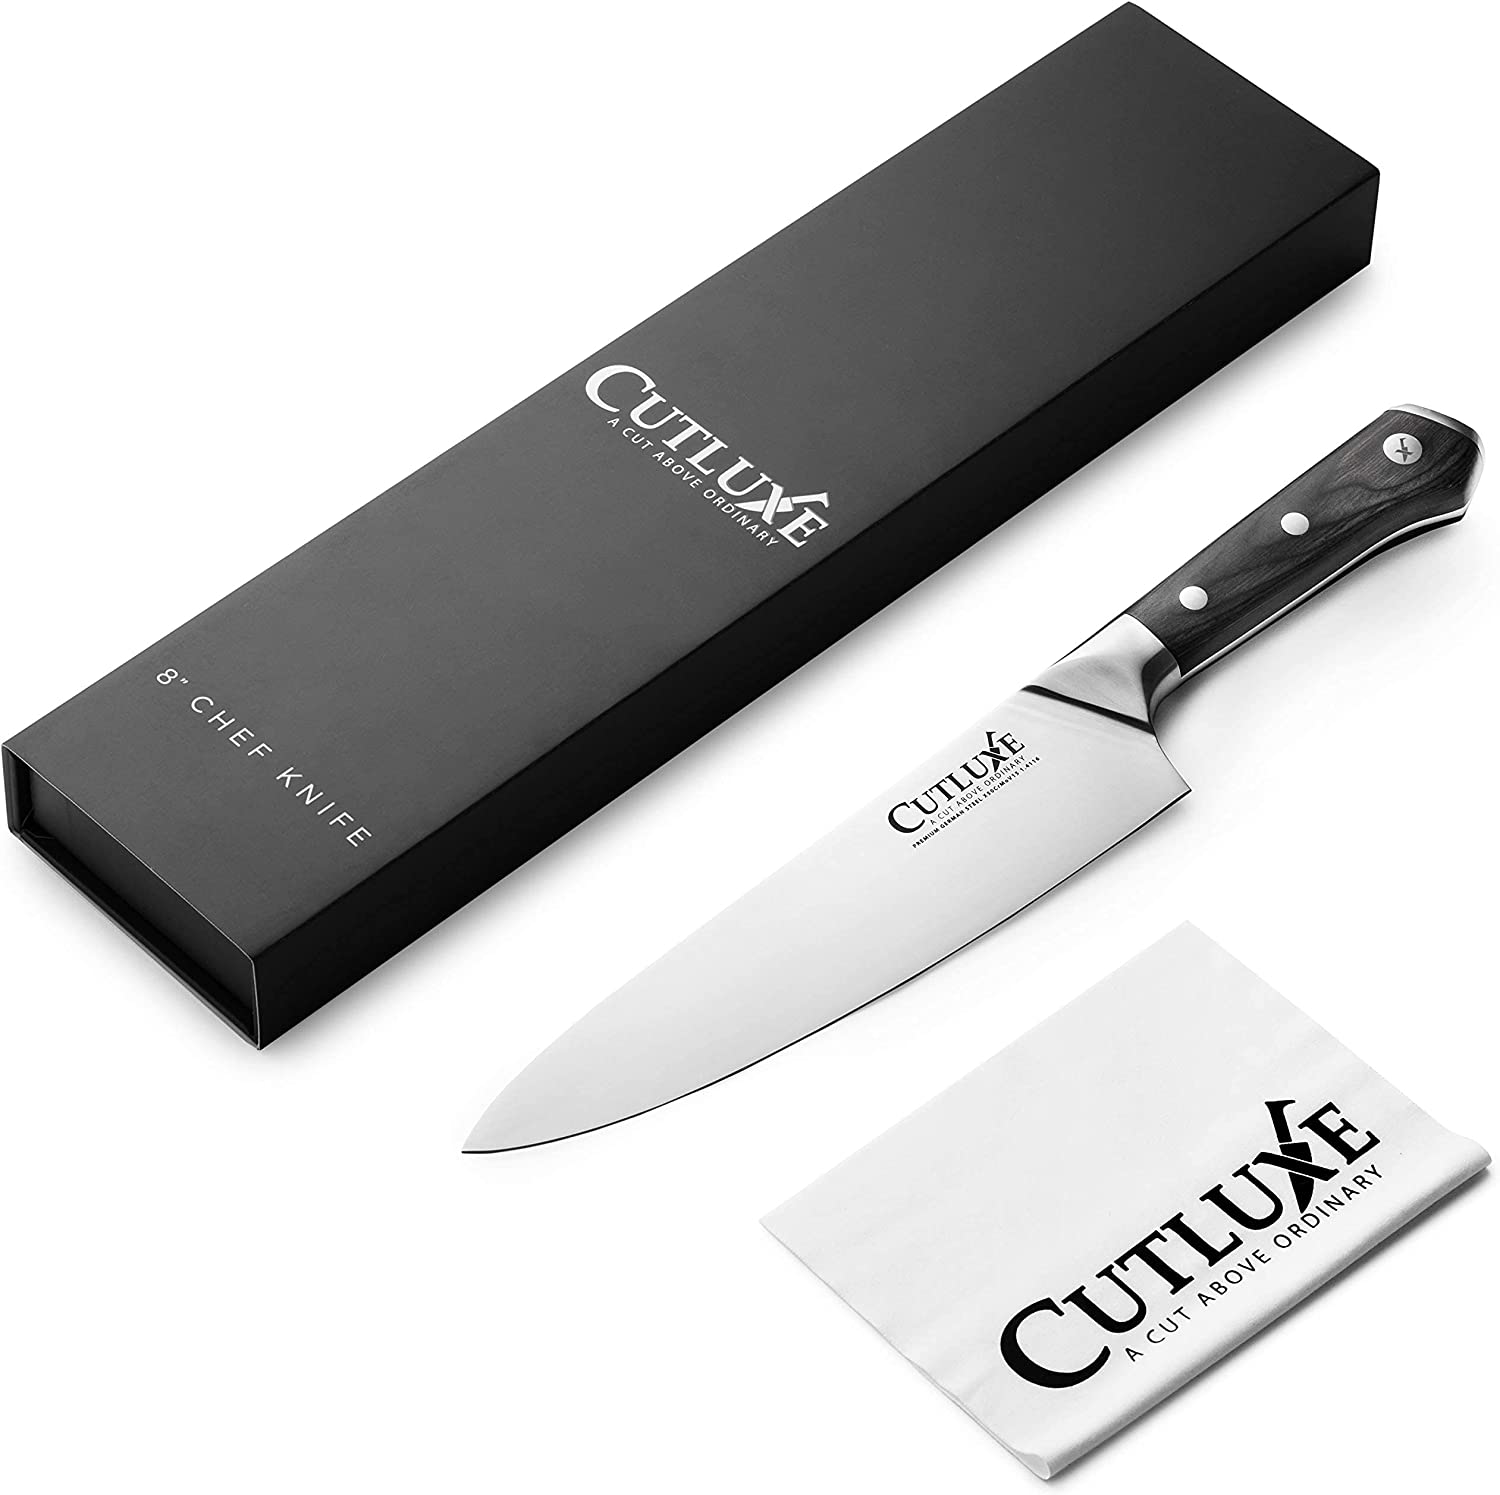 Cutluxe Artisan Chef's Knife Review